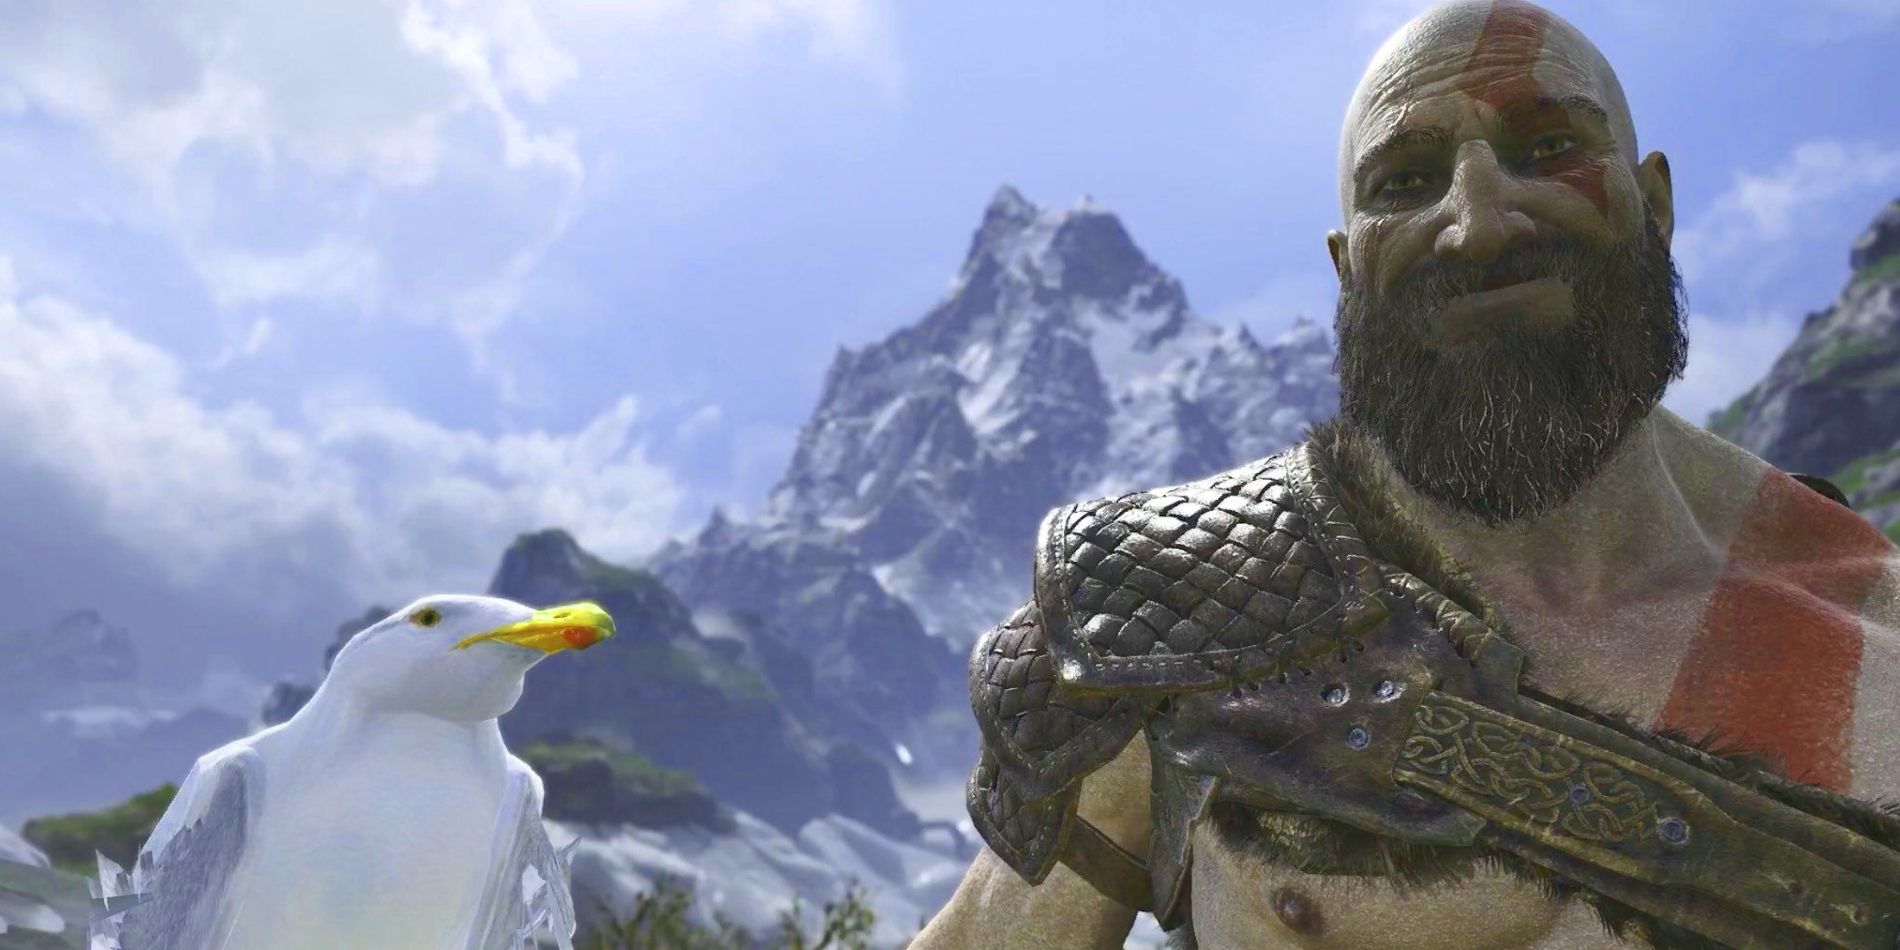 God of War's Kratos is seen standing on top of a high mountaintop, sporting a rare smile from the character while standing next to a confused looking seagull.